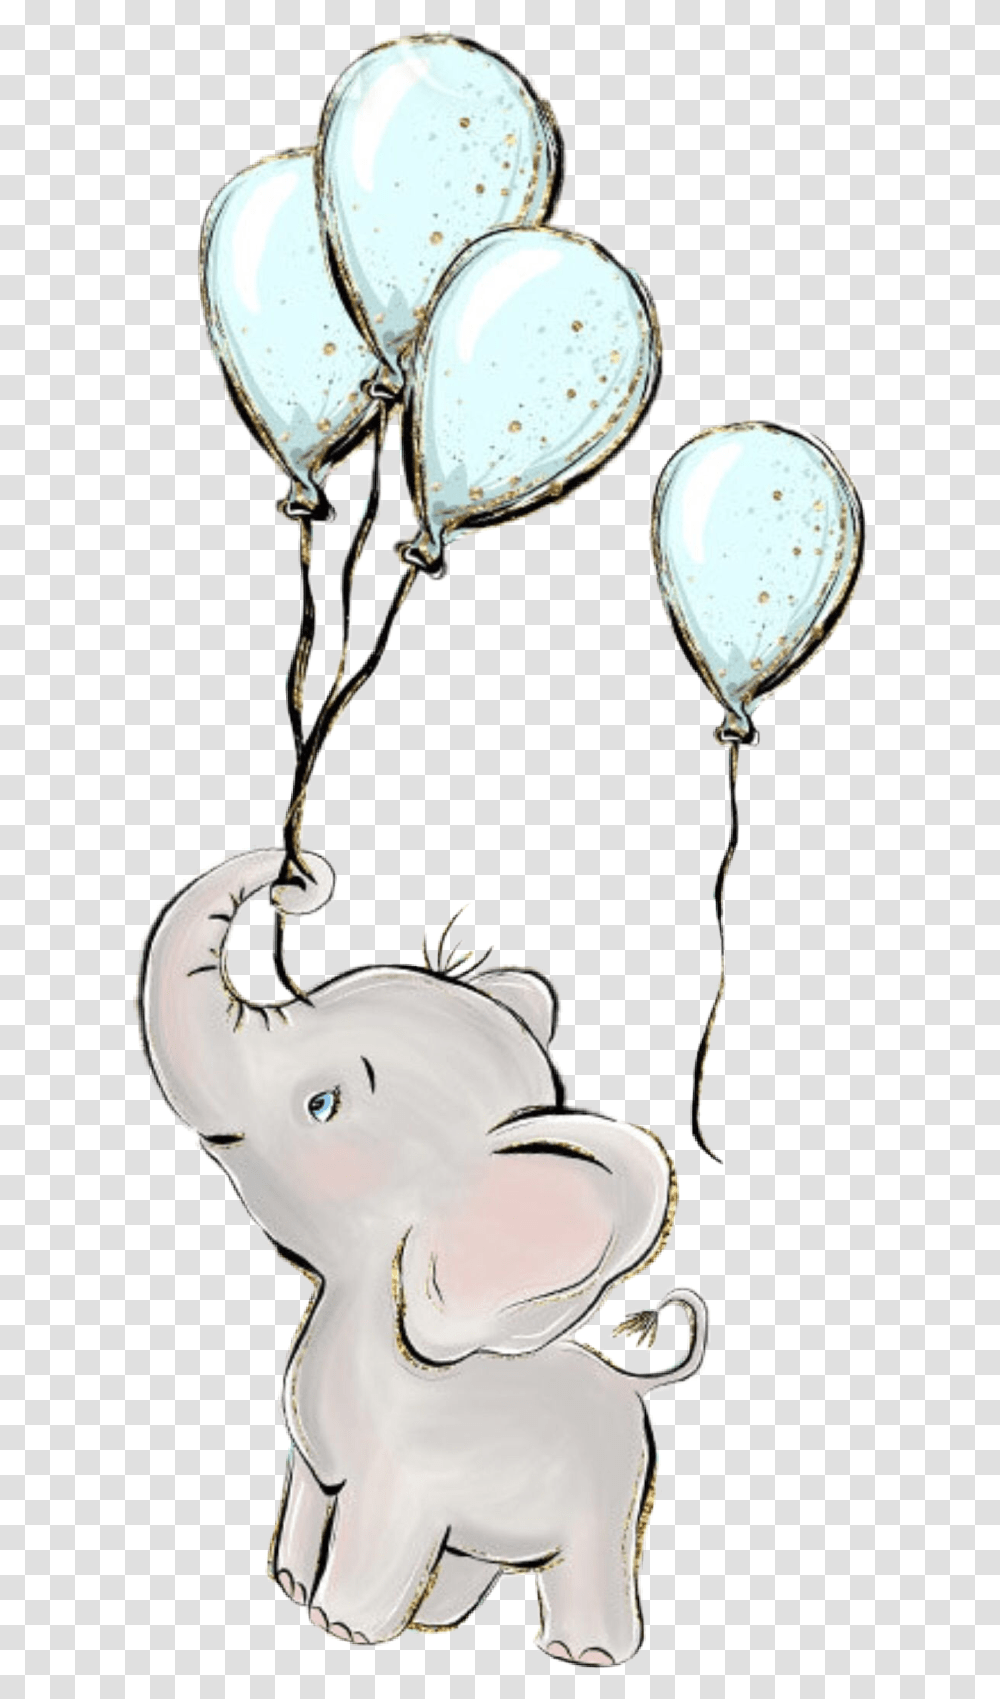 Watercolor Elephant Balloons Baby Boy Babyanimals Elephant With Balloons Clipart, Apparel, Lamp Transparent Png